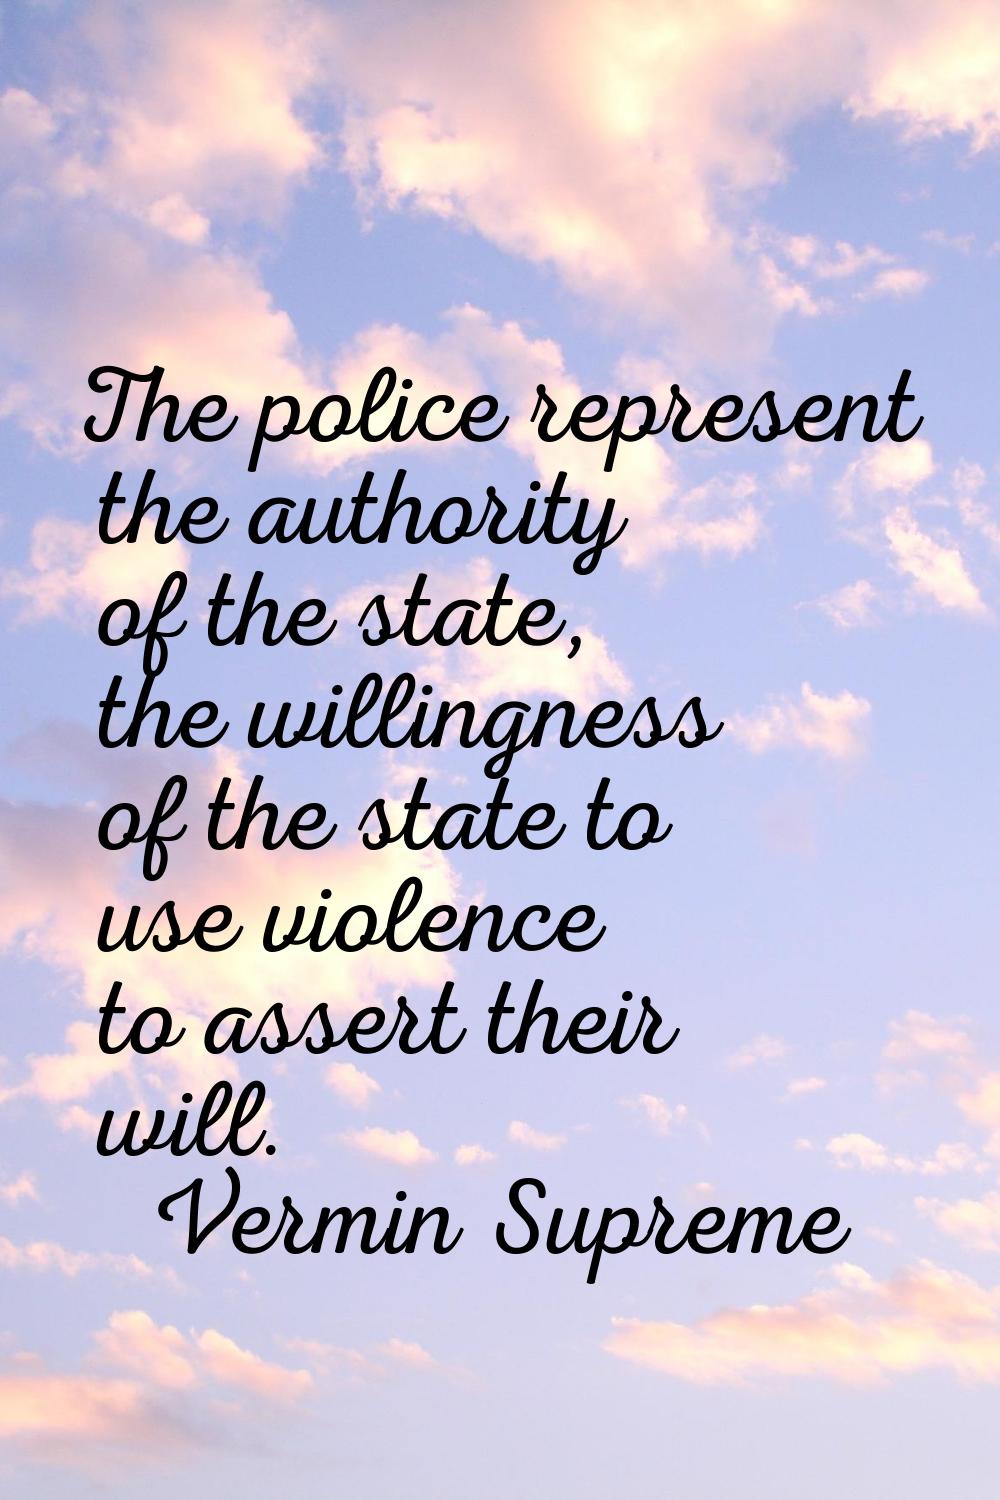 The police represent the authority of the state, the willingness of the state to use violence to as